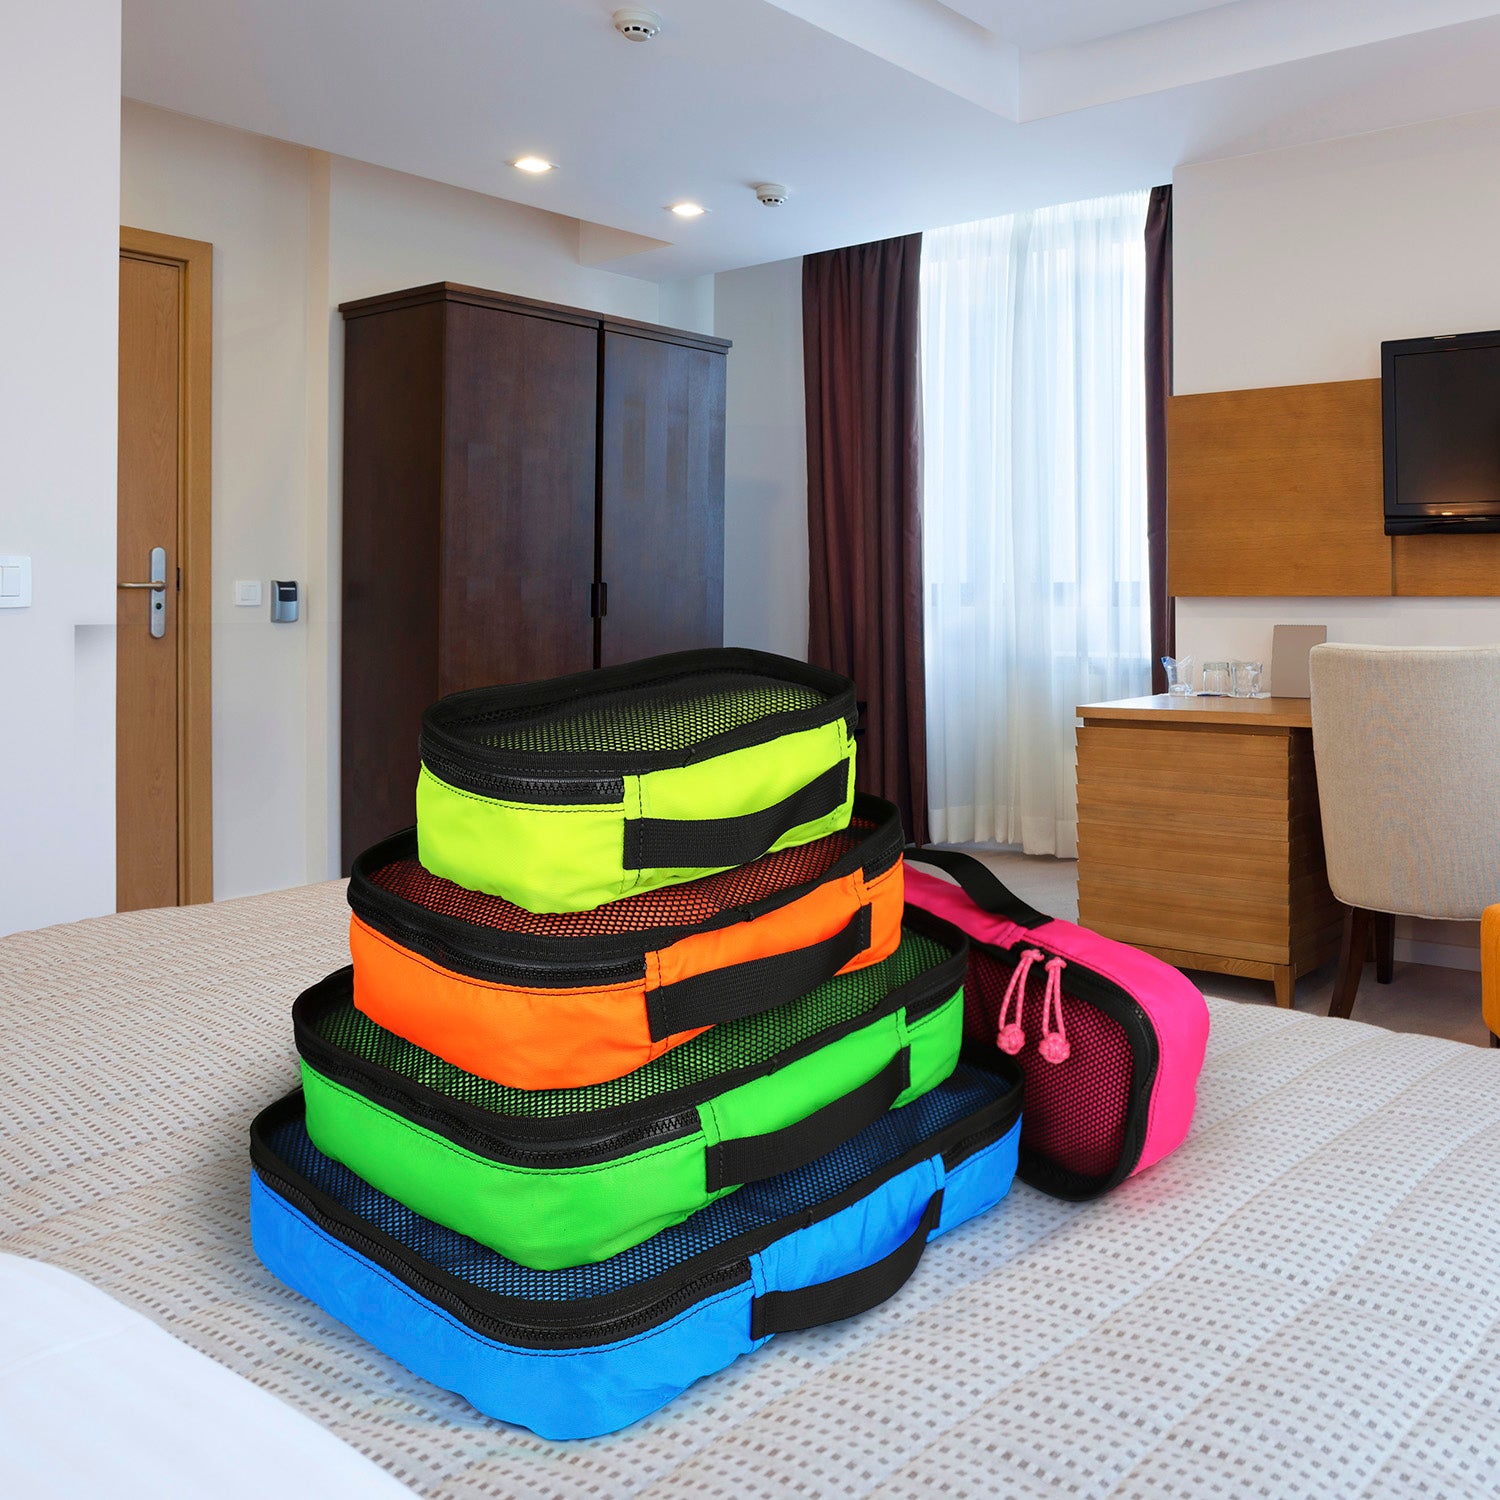 Stacked view of packing cubes in each color available. 